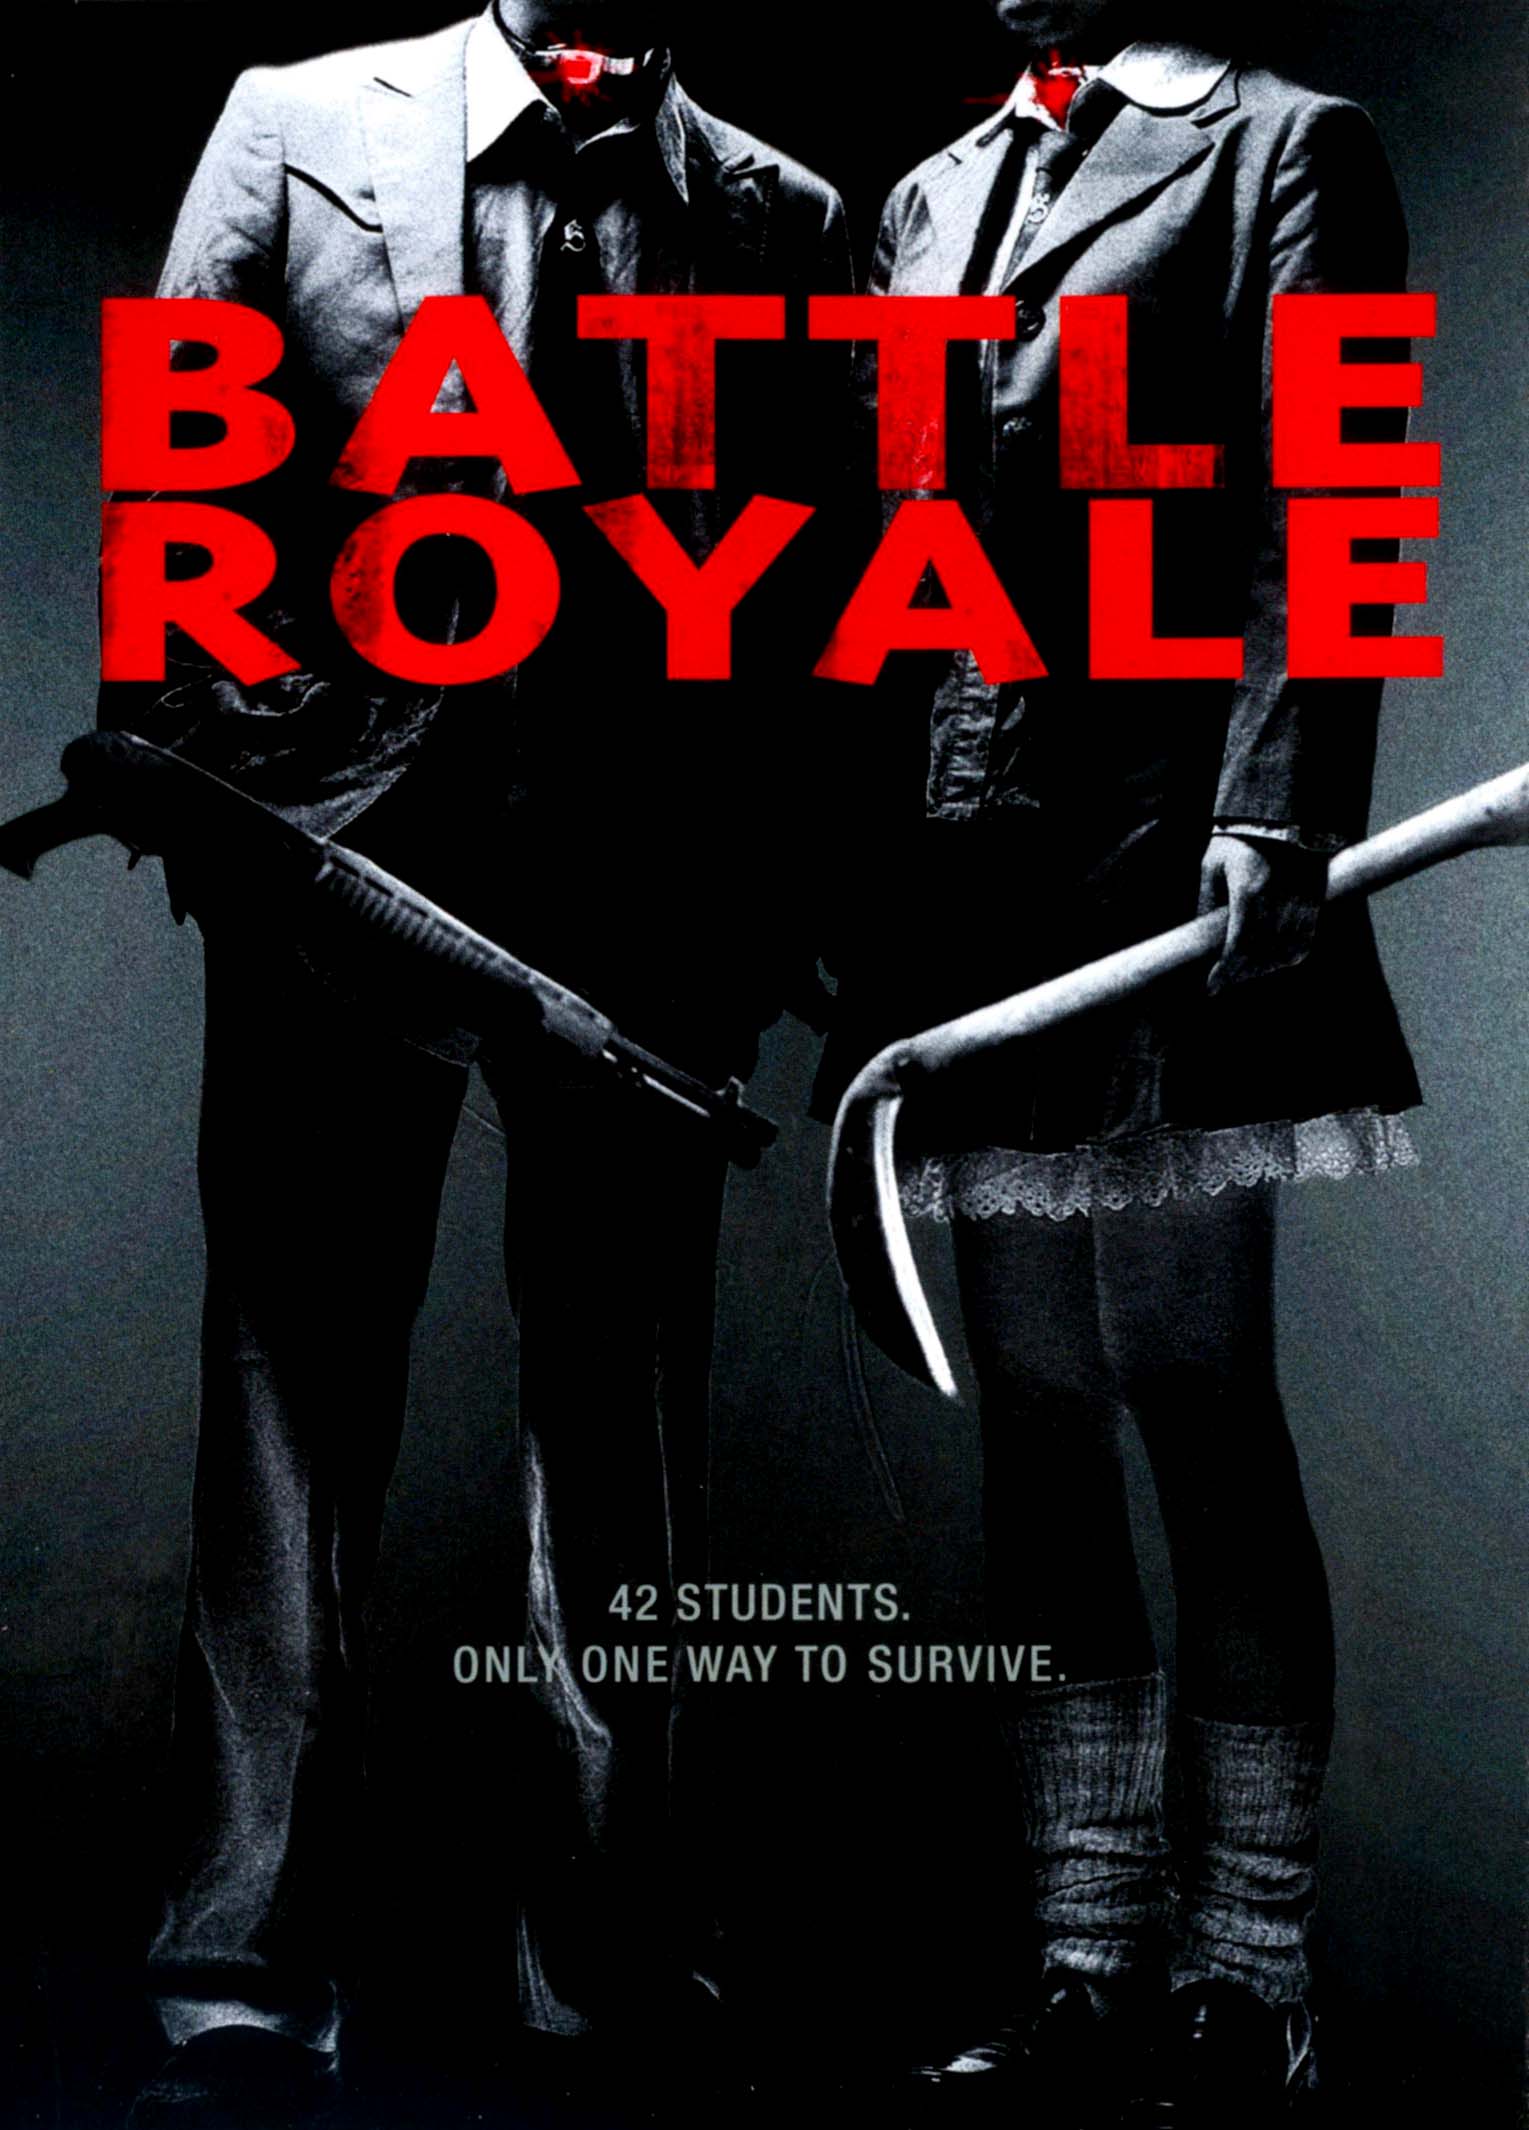 PennsylvAsia: Director's cut of 2000 Japanese film Battle Royale  (バトル・ロワイアル) at Row House Cinema, from May 20.